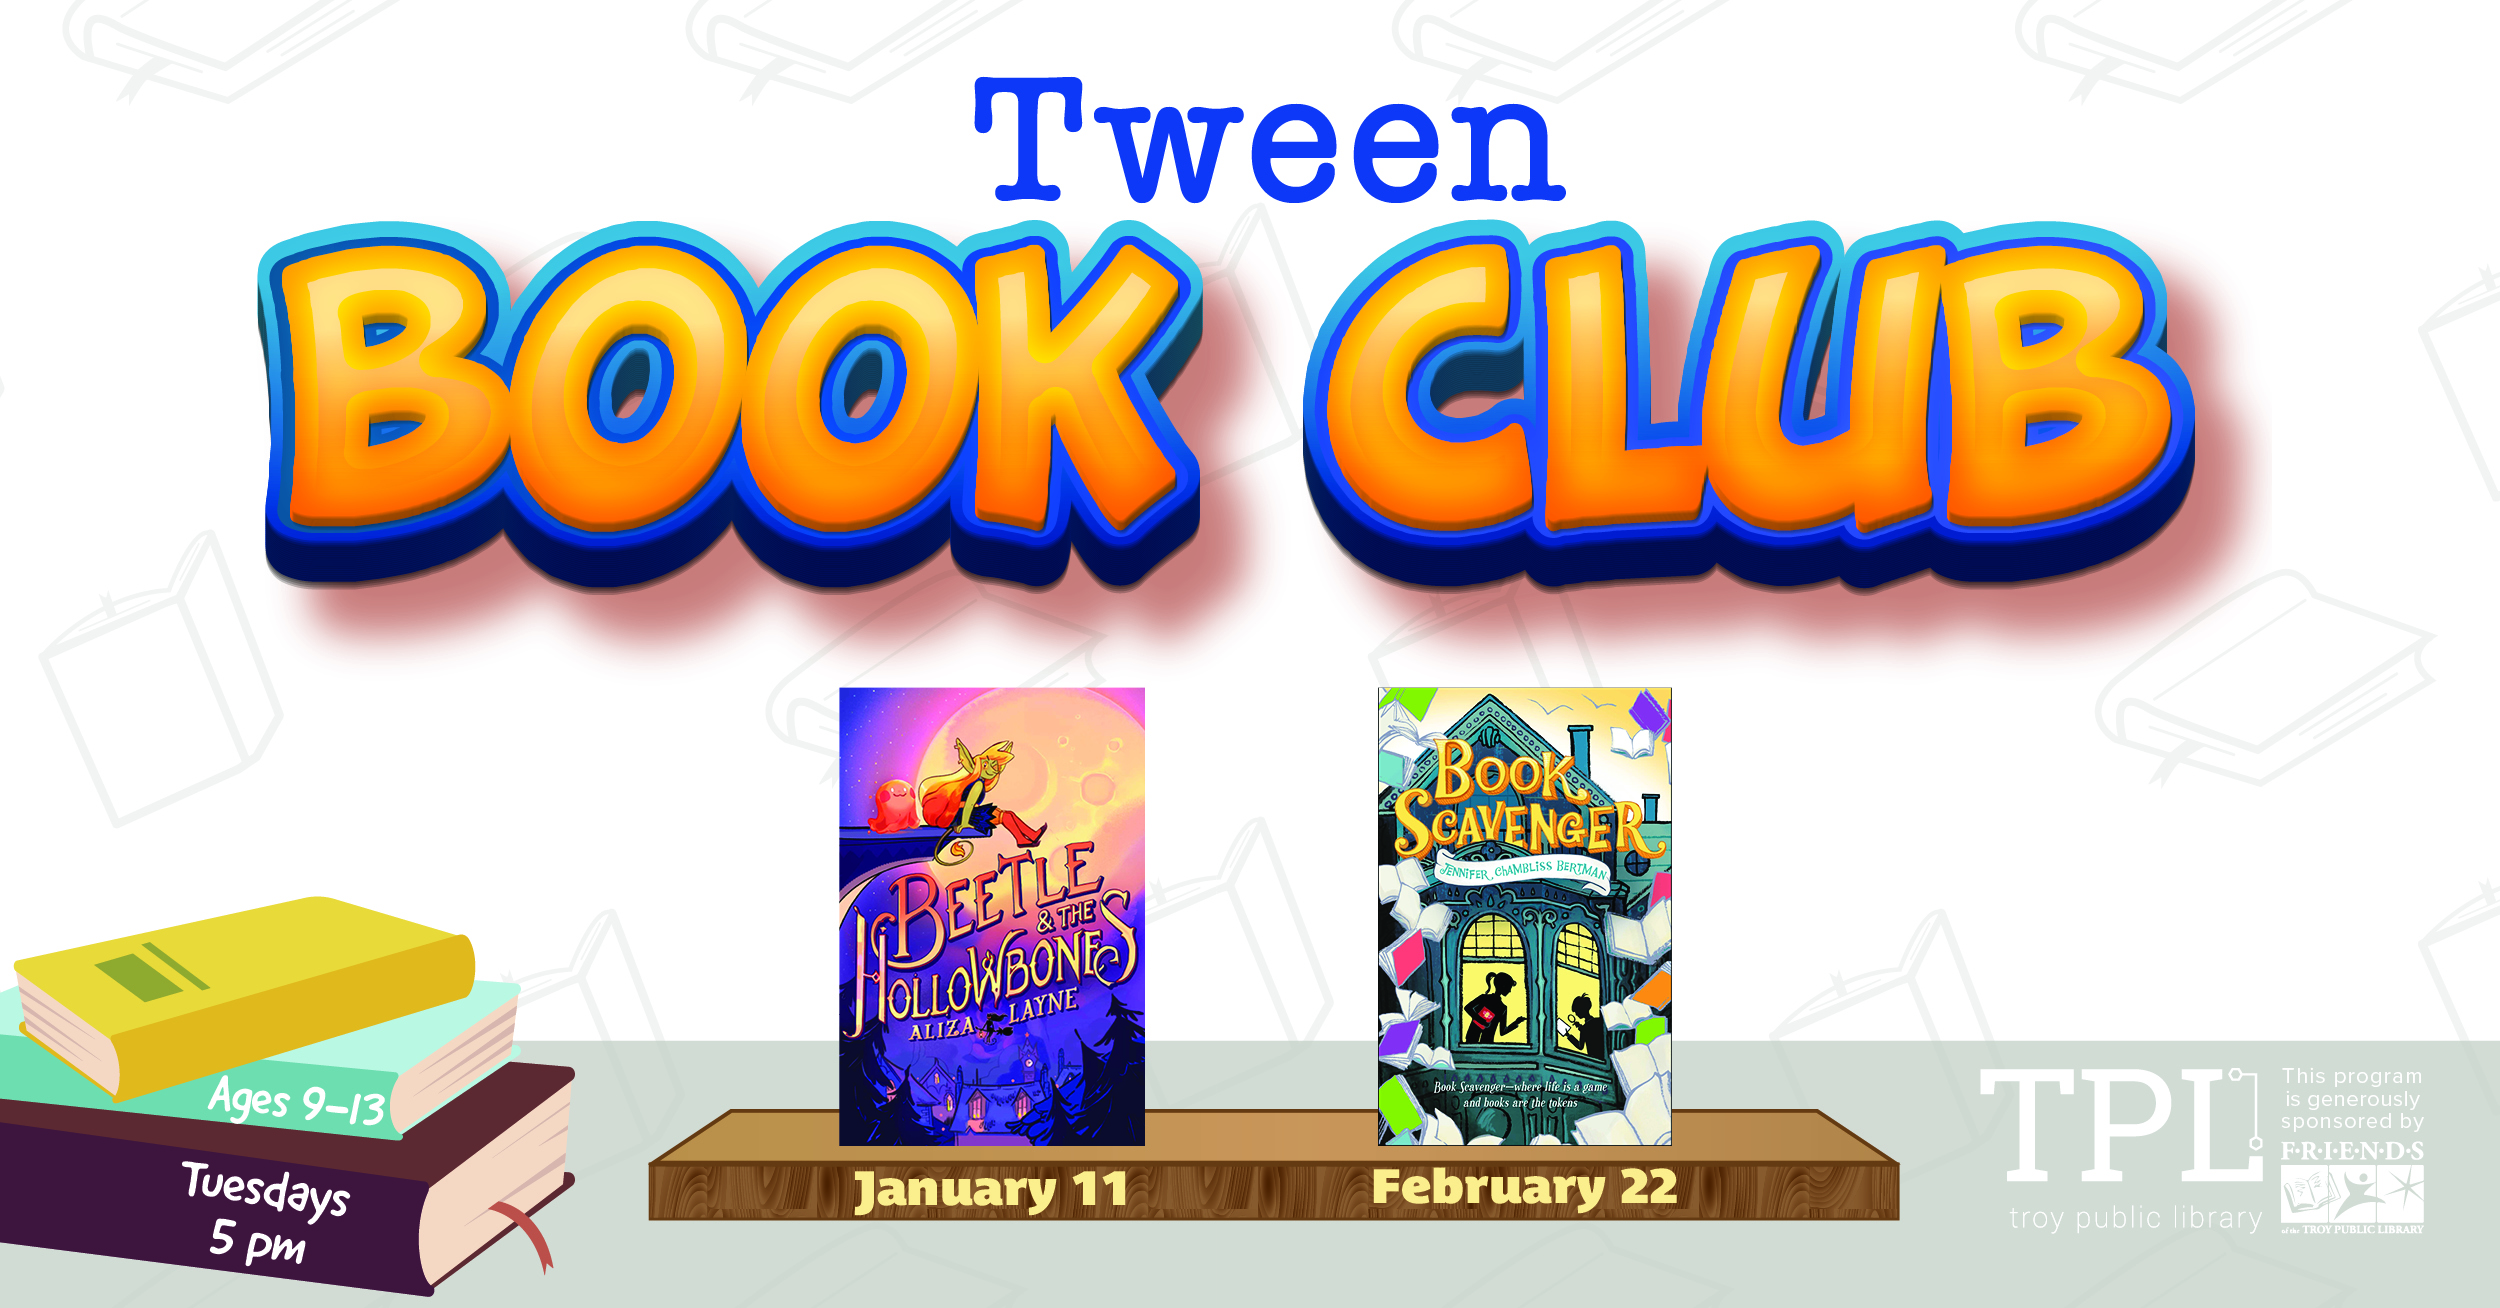 "tween" in blue letters "book club" in orange letters with shadow outline. two book covers with January 11 and February 22 written underneath. "ages 9-13" and "Tuesdays 5pm" written on book spines